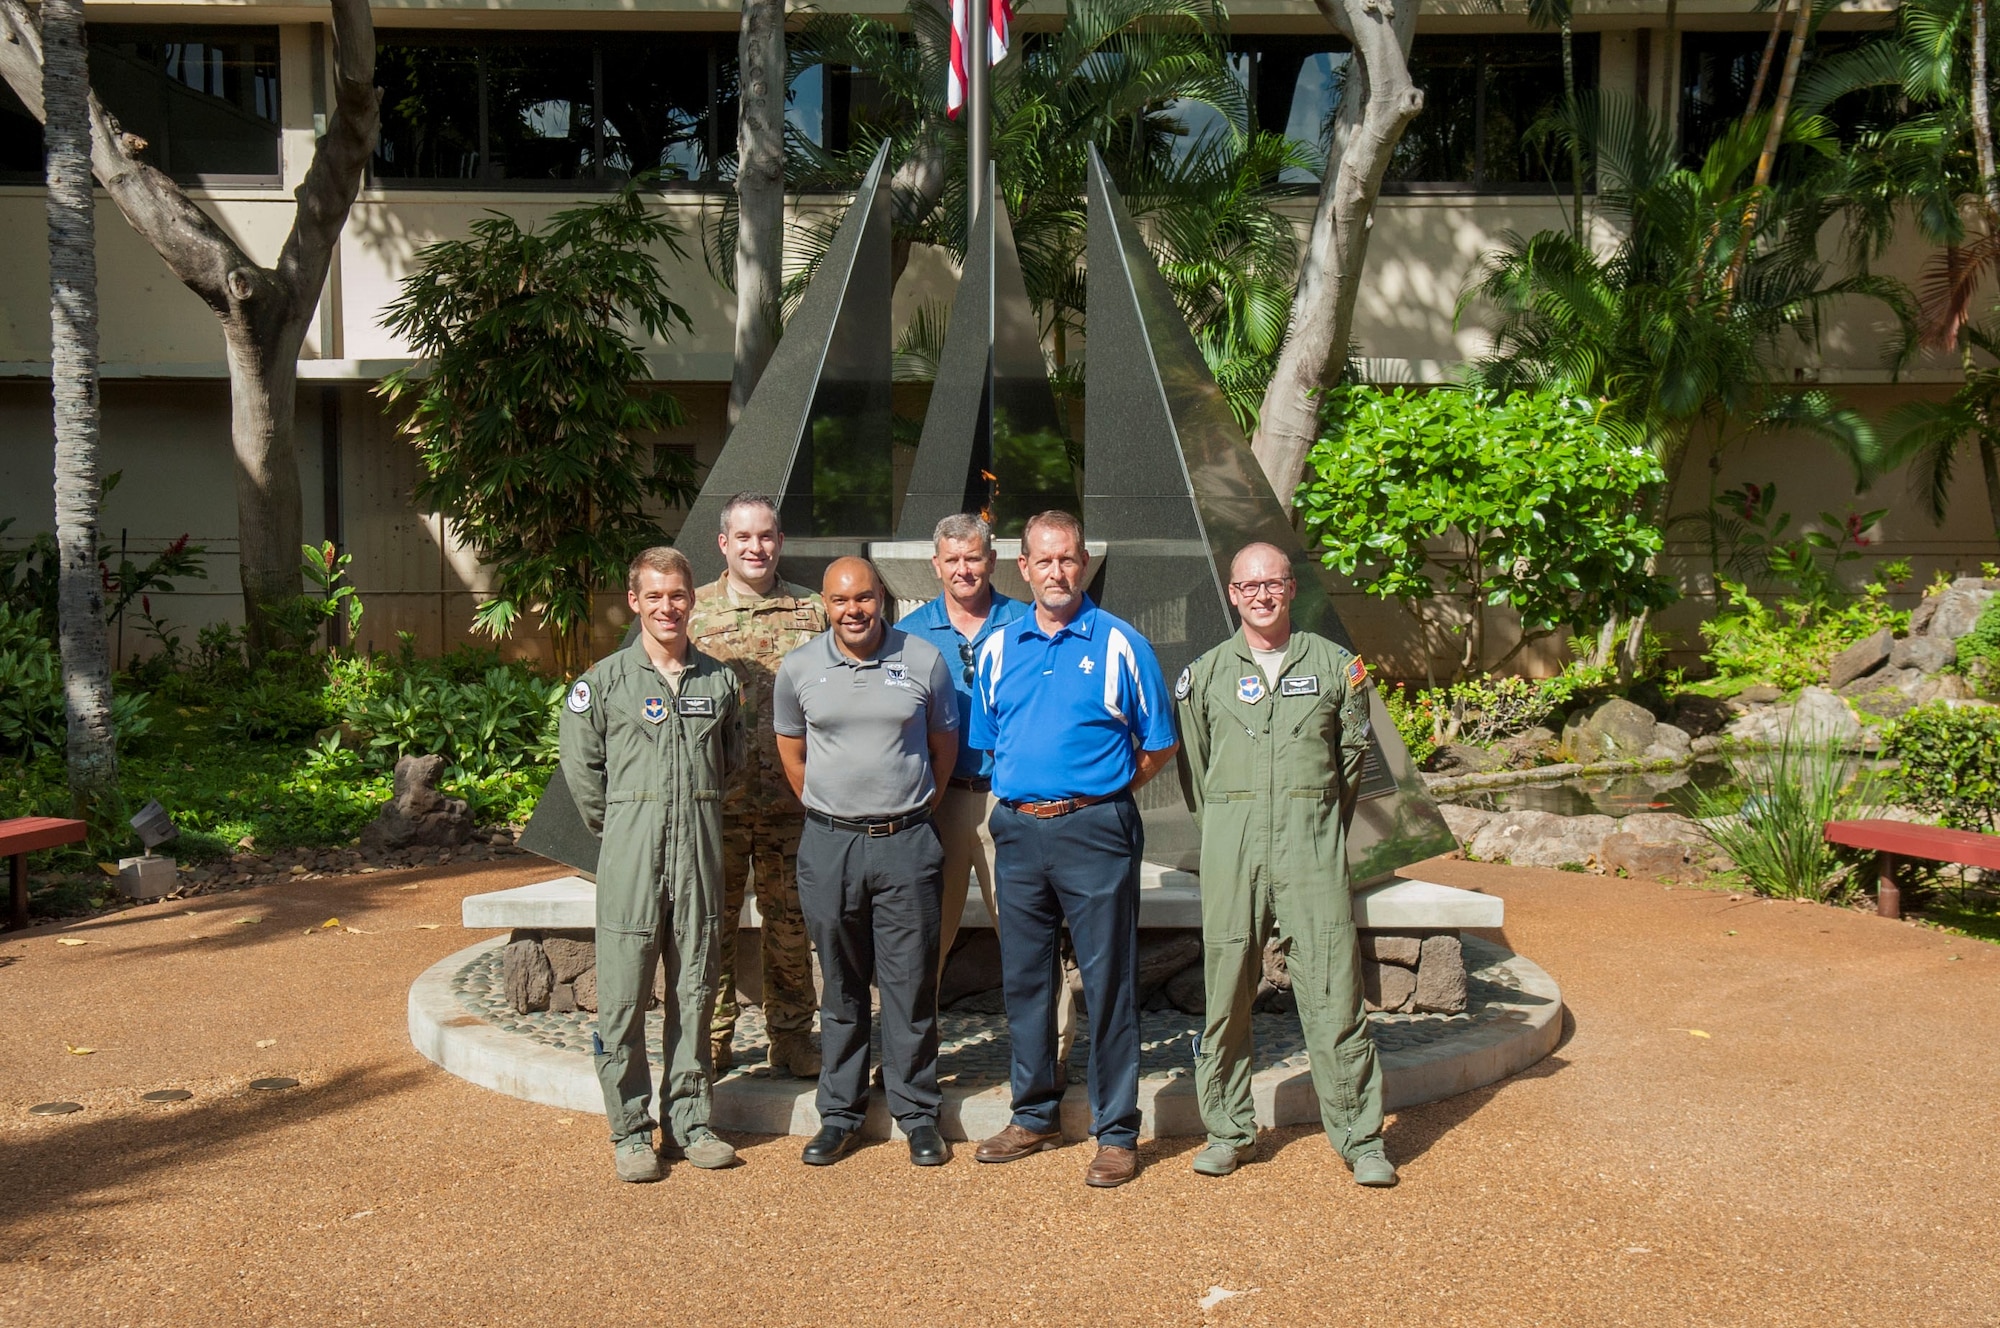 Members of the 12th Operations Support Squadron and 559th Flying Training Squadron, at Joint Base San Antonio-Randolph, Texas, pose for a group photo during a history tour at Headquarters Pacific Air Forces, Joint Base Pearl Harbor-Hickam, Hawaii, July 10, 2019. The purpose of the visit was for Air Education and Training Command (AETC) members to learn more about Pacific theater operations and build and a relationship between AETC as a major command (MAJCOM) and PACAF as a combatant command (COCOM).